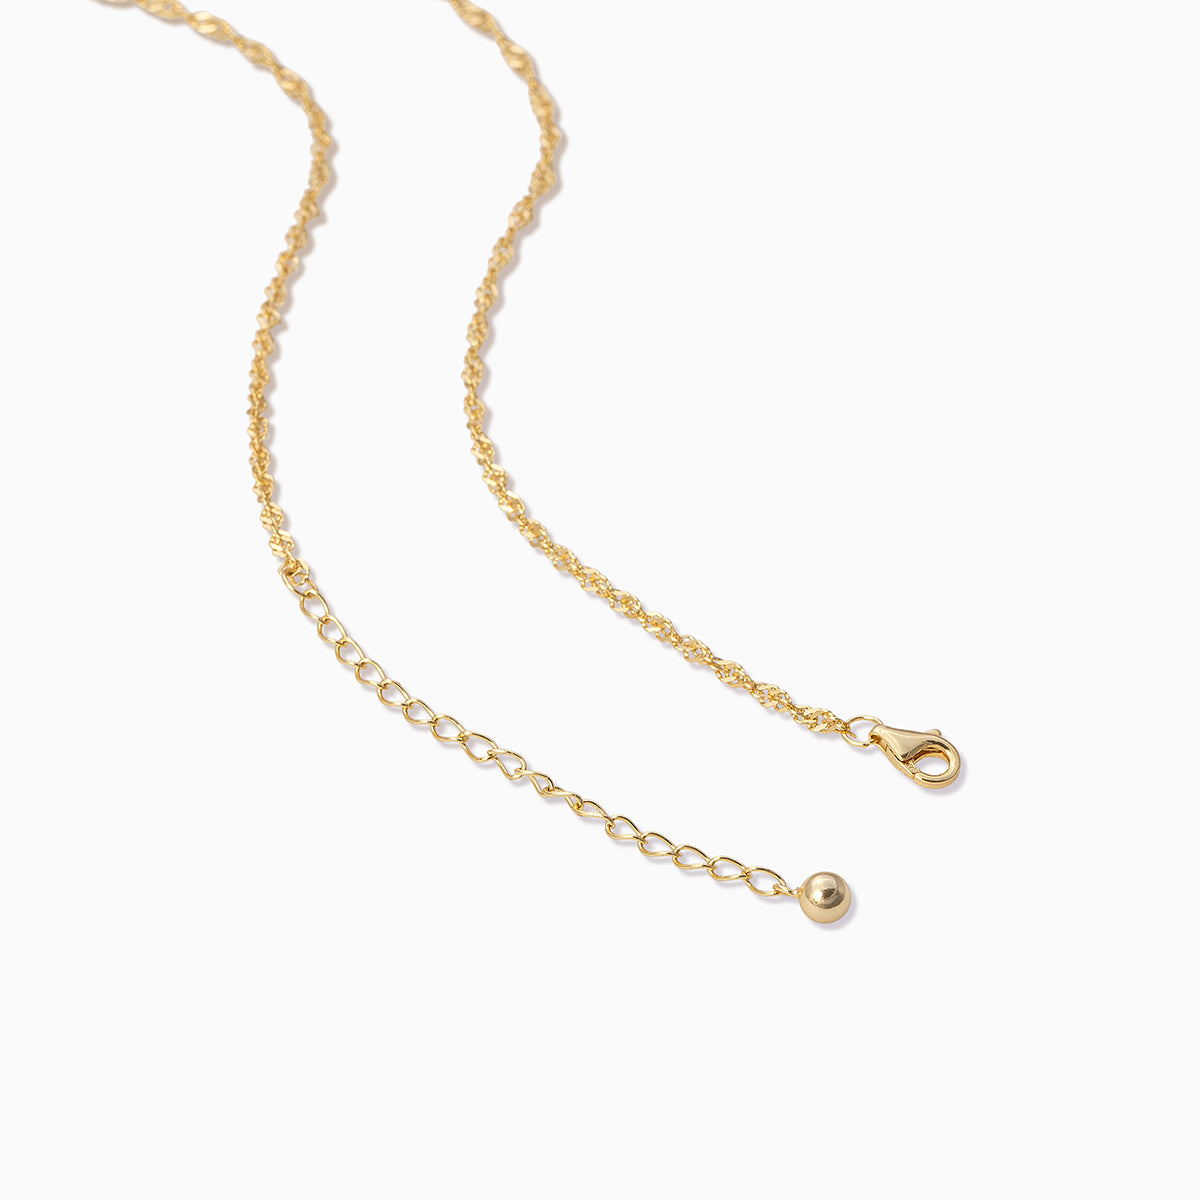 Buy 18 Carat Gold Vermeil Chain Necklace, Medium-weight Curb Chain Necklace,  Gold Vermeil Curb Chain in 16, 18, 20, 22, 24 or 30 Inches Online in India  - Etsy